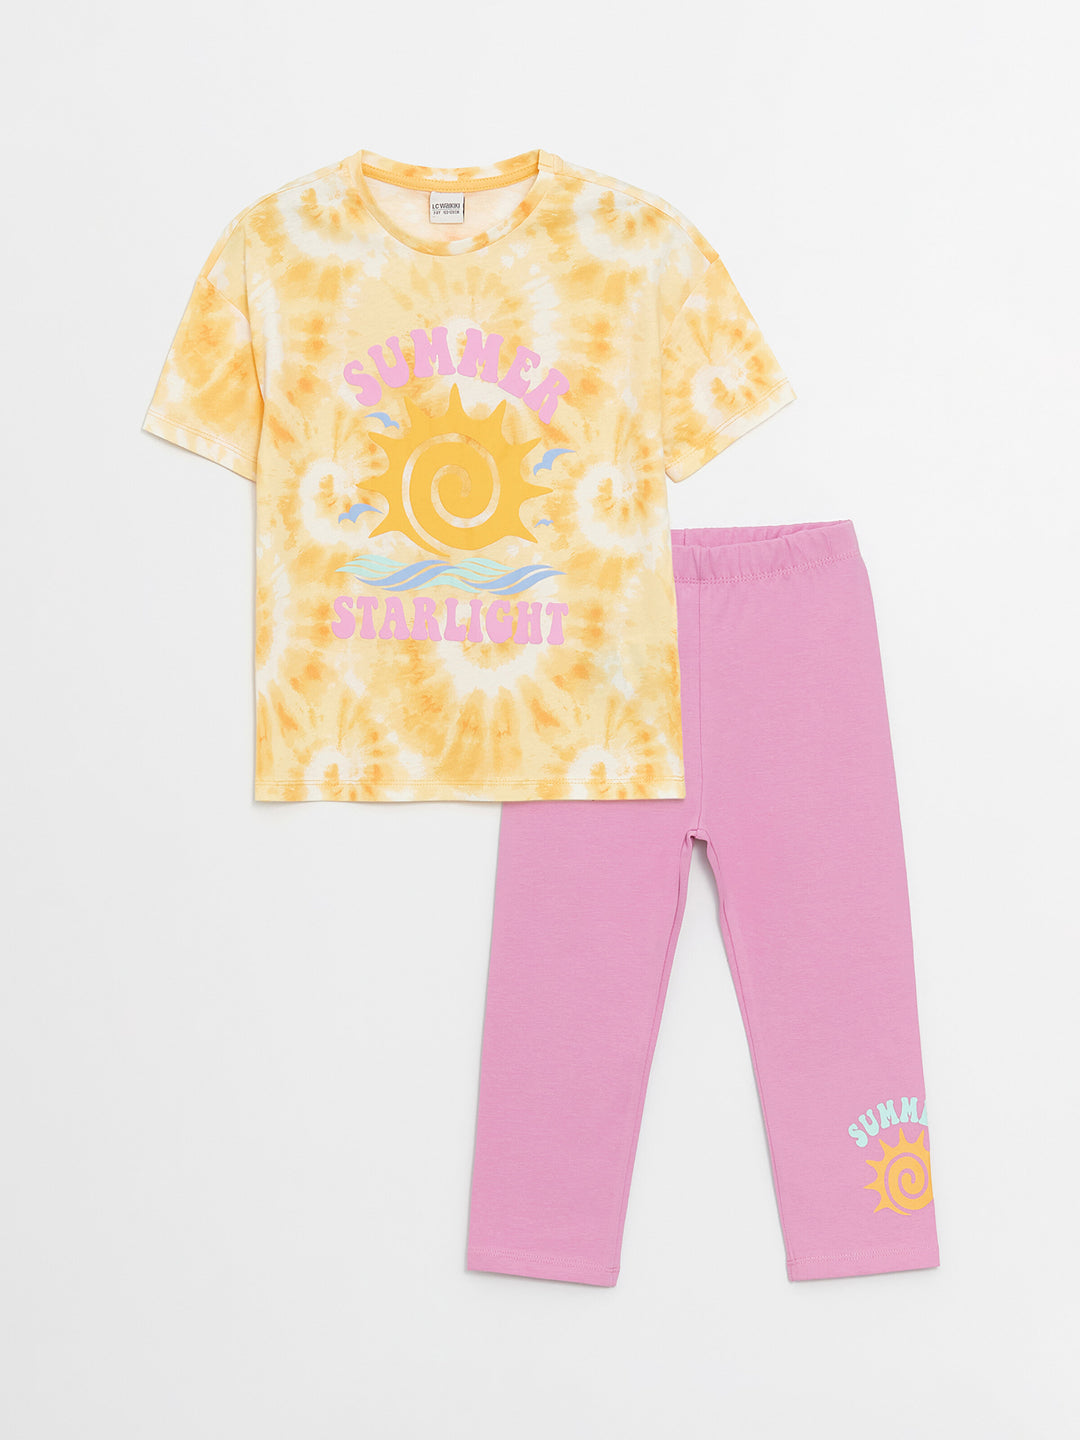 Crew Neck Printed Short Sleeve Girls T-Shirt And Tights